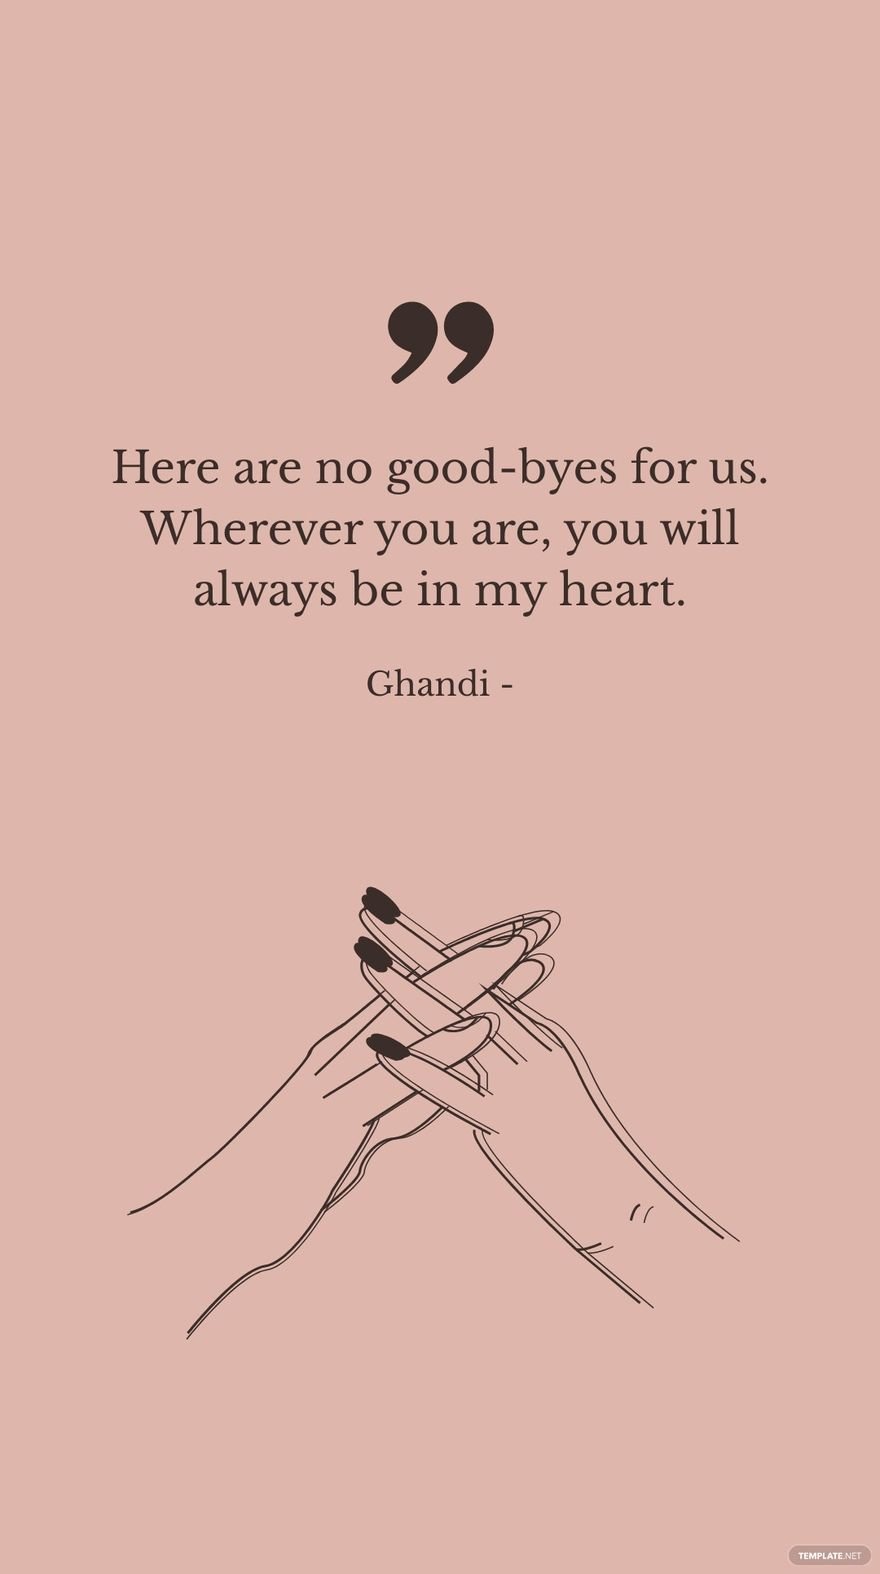 Free Ghandi - Here are no good-byes for us. Wherever you are, you will always be in my heart. in JPG